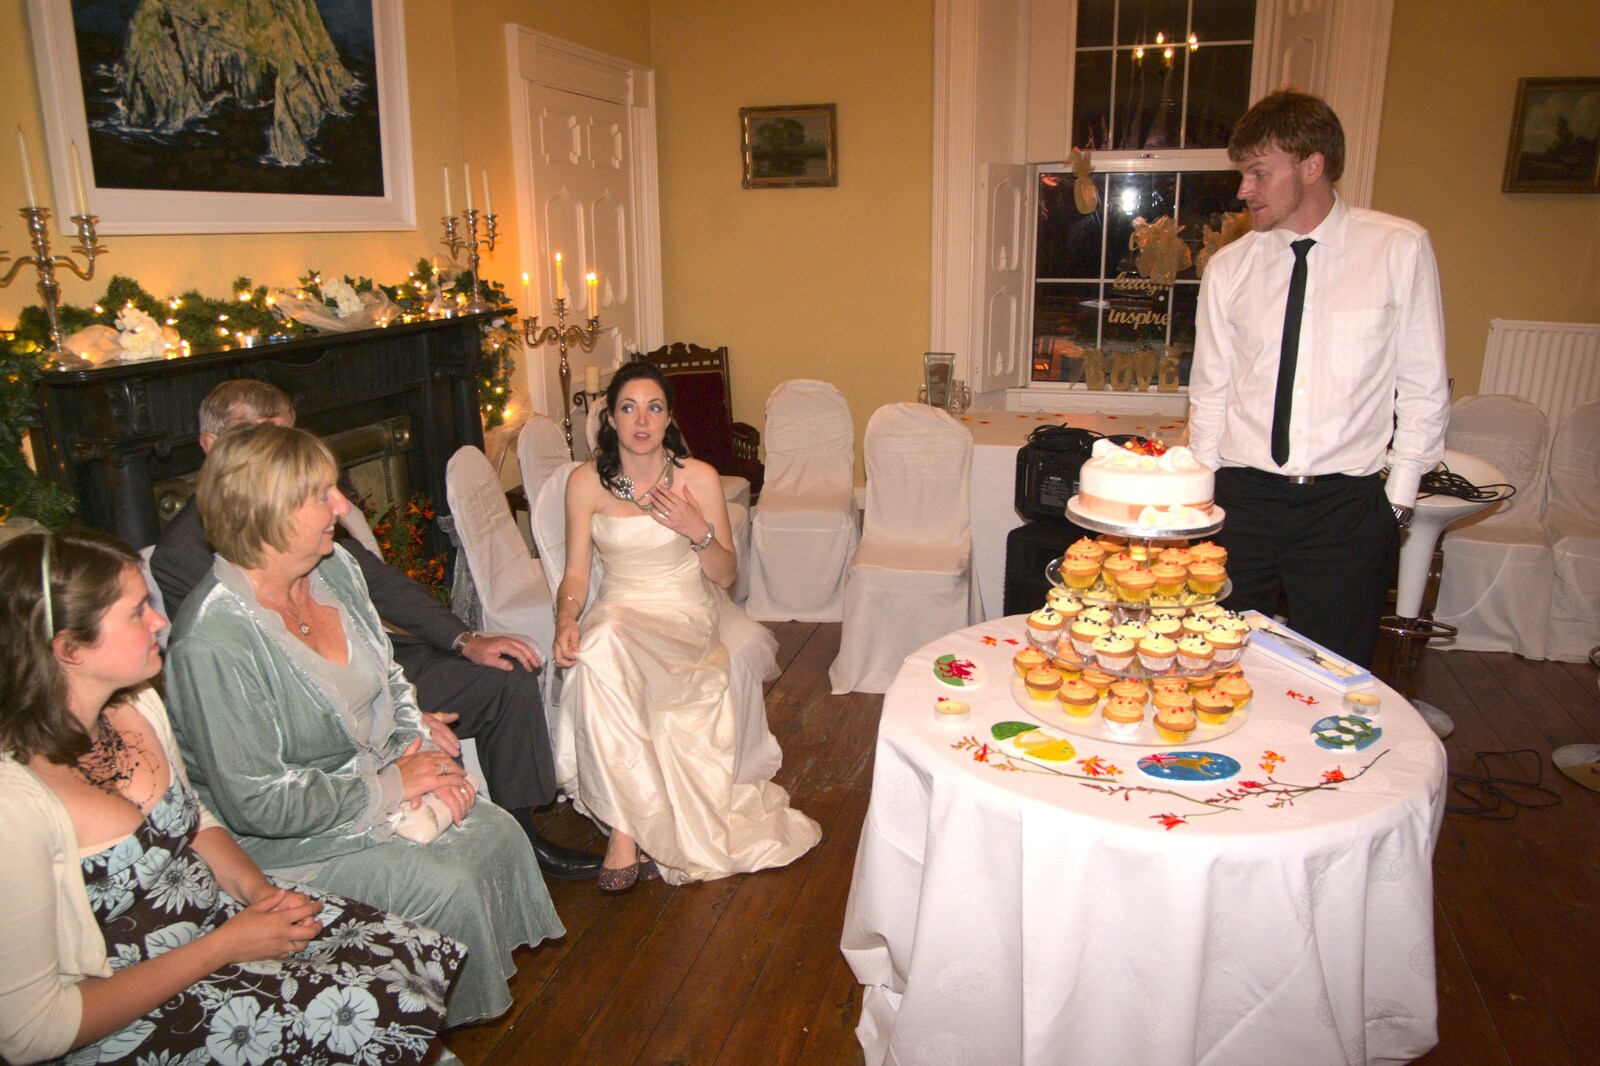 Cameron lurks by the cake from Julie and Cameron's Wedding, Ballintaggart House, Dingle - 24th July 2009